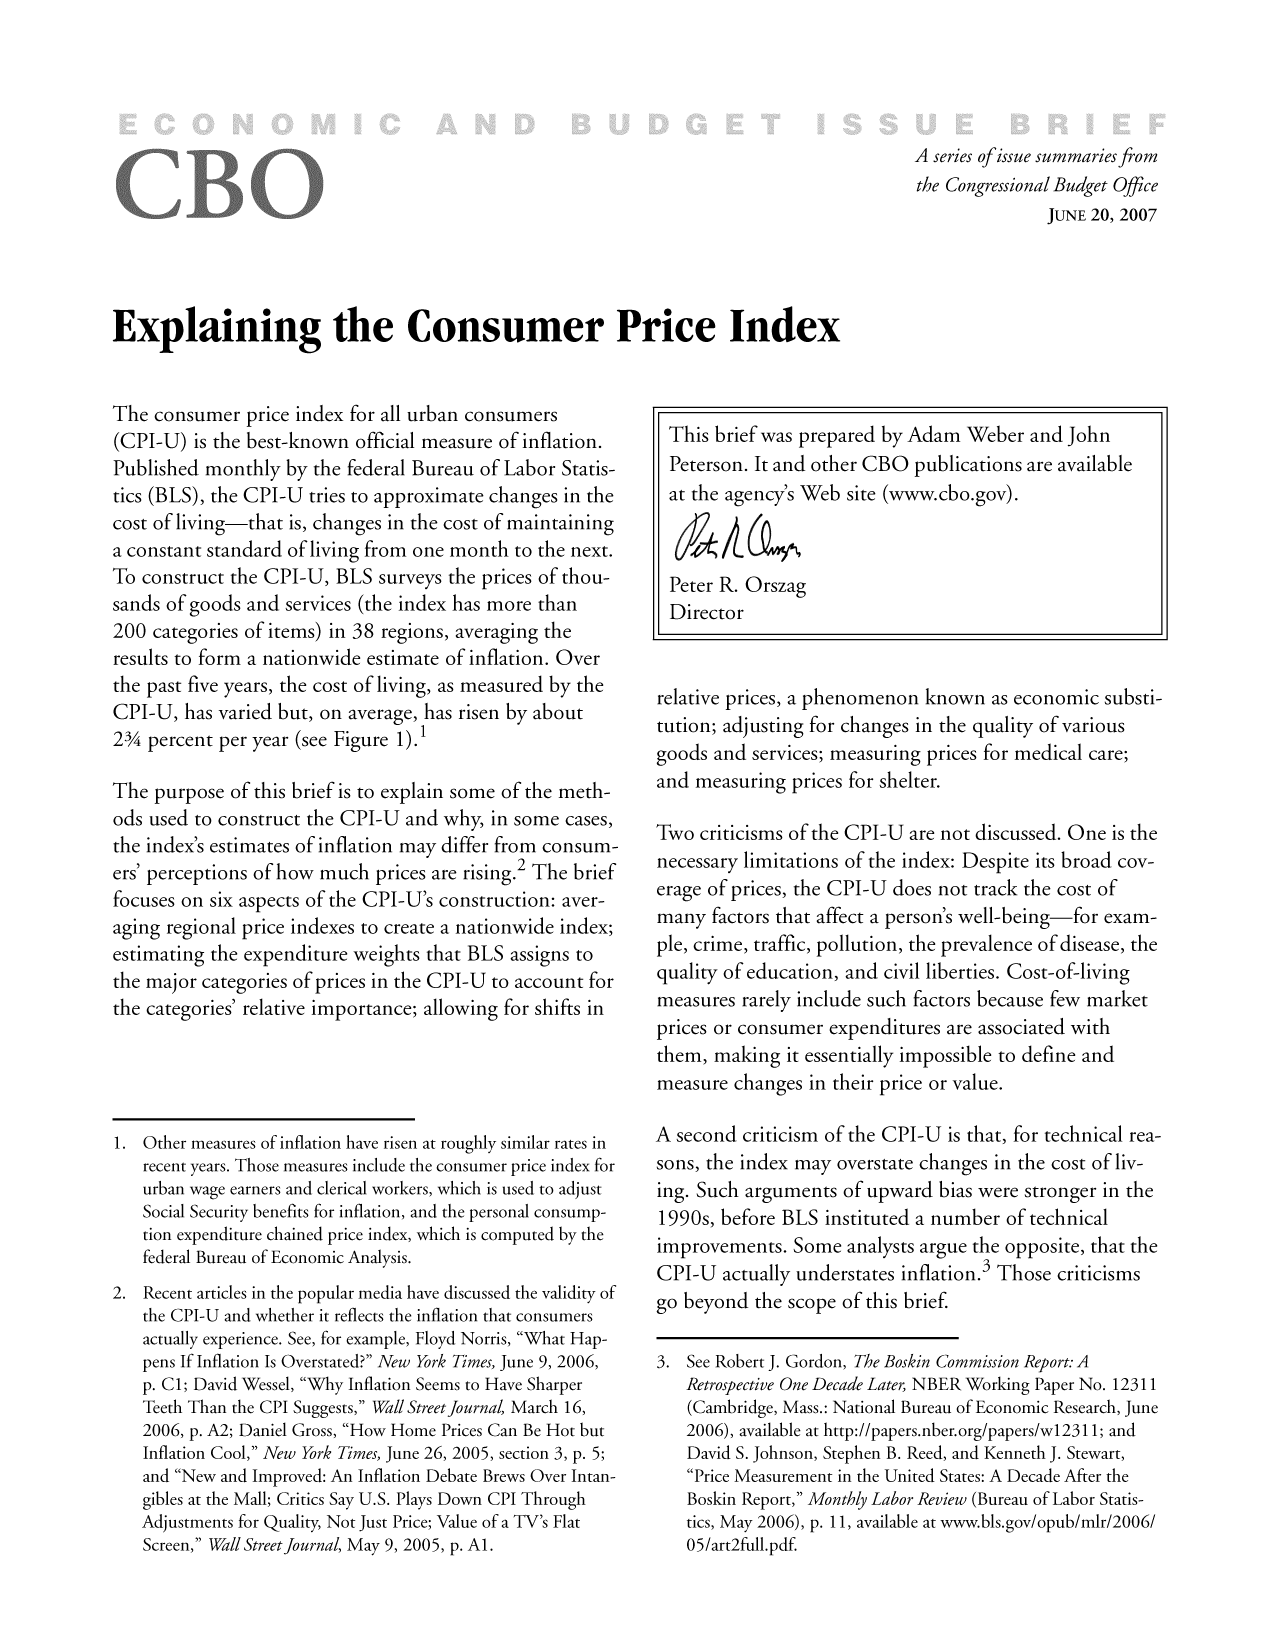 handle is hein.congrec/cbo9571 and id is 1 raw text is: A series ofissue summaries from
the Congressional Budget Office
JUNE 20, 2007

Explaining the Consumer Price Index

The consumer price index for all urban consumers
(CPI-U) is the best-known official measure of inflation.
Published monthly by the federal Bureau of Labor Statis-
tics (BLS), the CPI-U tries to approximate changes in the
cost of living-that is, changes in the cost of maintaining
a constant standard of living from one month to the next.
To construct the CPI-U, BLS surveys the prices of thou-
sands of goods and services (the index has more than
200 categories of items) in 38 regions, averaging the
results to form a nationwide estimate of inflation. Over
the past five years, the cost of living, as measured by the
CPI-U, has varied but, on average, has risen by about
234 percent per year (see Figure 1).1
The purpose of this brief is to explain some of the meth-
ods used to construct the CPI-U and why, in some cases,
the index's estimates of inflation may differ from consum-
ers' perceptions of how much prices are rising.2 The brief
focuses on six aspects of the CPI-U's construction: aver-
aging regional price indexes to create a nationwide index;
estimating the expenditure weights that BLS assigns to
the major categories of prices in the CPI-U to account for
the categories' relative importance; allowing for shifts in

1. Other measures of inflation have risen at roughly similar rates in
recent years. Those measures include the consumer price index for
urban wage earners and clerical workers, which is used to adjust
Social Security benefits for inflation, and the personal consump-
tion expenditure chained price index, which is computed by the
federal Bureau of Economic Analysis.
2. Recent articles in the popular media have discussed the validity of
the CPI-U and whether it reflects the inflation that consumers
actually experience. See, for example, Floyd Norris, What Hap-
pens If Inflation Is Overstated? New York Times, June 9, 2006,
p. Cl; David Wessel, Why Inflation Seems to Have Sharper
Teeth Than the CPI Suggests, Wall Street Journal, March 16,
2006, p. A2; Daniel Gross, How Home Prices Can Be Hot but
Inflation Cool, New York Times, June 26, 2005, section 3, p. 5;
and New and Improved: An Inflation Debate Brews Over Intan-
gibles at the Mall; Critics Say U.S. Plays Down CPI Through
Adjustments for Quality, Not Just Price; Value of a TV's Flat
Screen, Wall Street Journal, May 9, 2005, p. Al.

This brief was prepared by Adam Weber and John
Peterson. It and other CBO publications are available
at the agency's Web site (www.cbo.gov).
Peter R. Orszag
Director
relative prices, a phenomenon known as economic substi-
tution; adjusting for changes in the quality of various
goods and services; measuring prices for medical care;
and measuring prices for shelter.
Two criticisms of the CPI-U are not discussed. One is the
necessary limitations of the index: Despite its broad cov-
erage of prices, the CPI-U does not track the cost of
many factors that affect a person's well-being-for exam-
ple, crime, traffic, pollution, the prevalence of disease, the
quality of education, and civil liberties. Cost-of-living
measures rarely include such factors because few market
prices or consumer expenditures are associated with
them, making it essentially impossible to define and
measure changes in their price or value.
A second criticism of the CPI-U is that, for technical rea-
sons, the index may overstate changes in the cost of liv-
ing. Such arguments of upward bias were stronger in the
1990s, before BLS instituted a number of technical
improvements. Some analysts argue the opposite, that the
CPI-U actually understates inflation.3 Those criticisms
go beyond the scope of this brief.
3. See Robert J. Gordon, The Boskin Commission Report: A
Retrospective One Decade Later, NBER Working Paper No. 12311
(Cambridge, Mass.: National Bureau of Economic Research, June
2006), available at http://papers.nber.org/papers/wl2311; and
David S. Johnson, Stephen B. Reed, and Kenneth J. Stewart,
Price Measurement in the United States: A Decade After the
Boskin Report, Monthly Labor Review (Bureau of Labor Statis-
tics, May 2006), p. 11, available at www.bls.gov/opub/mir/2006/
05/art2full.pdf.


